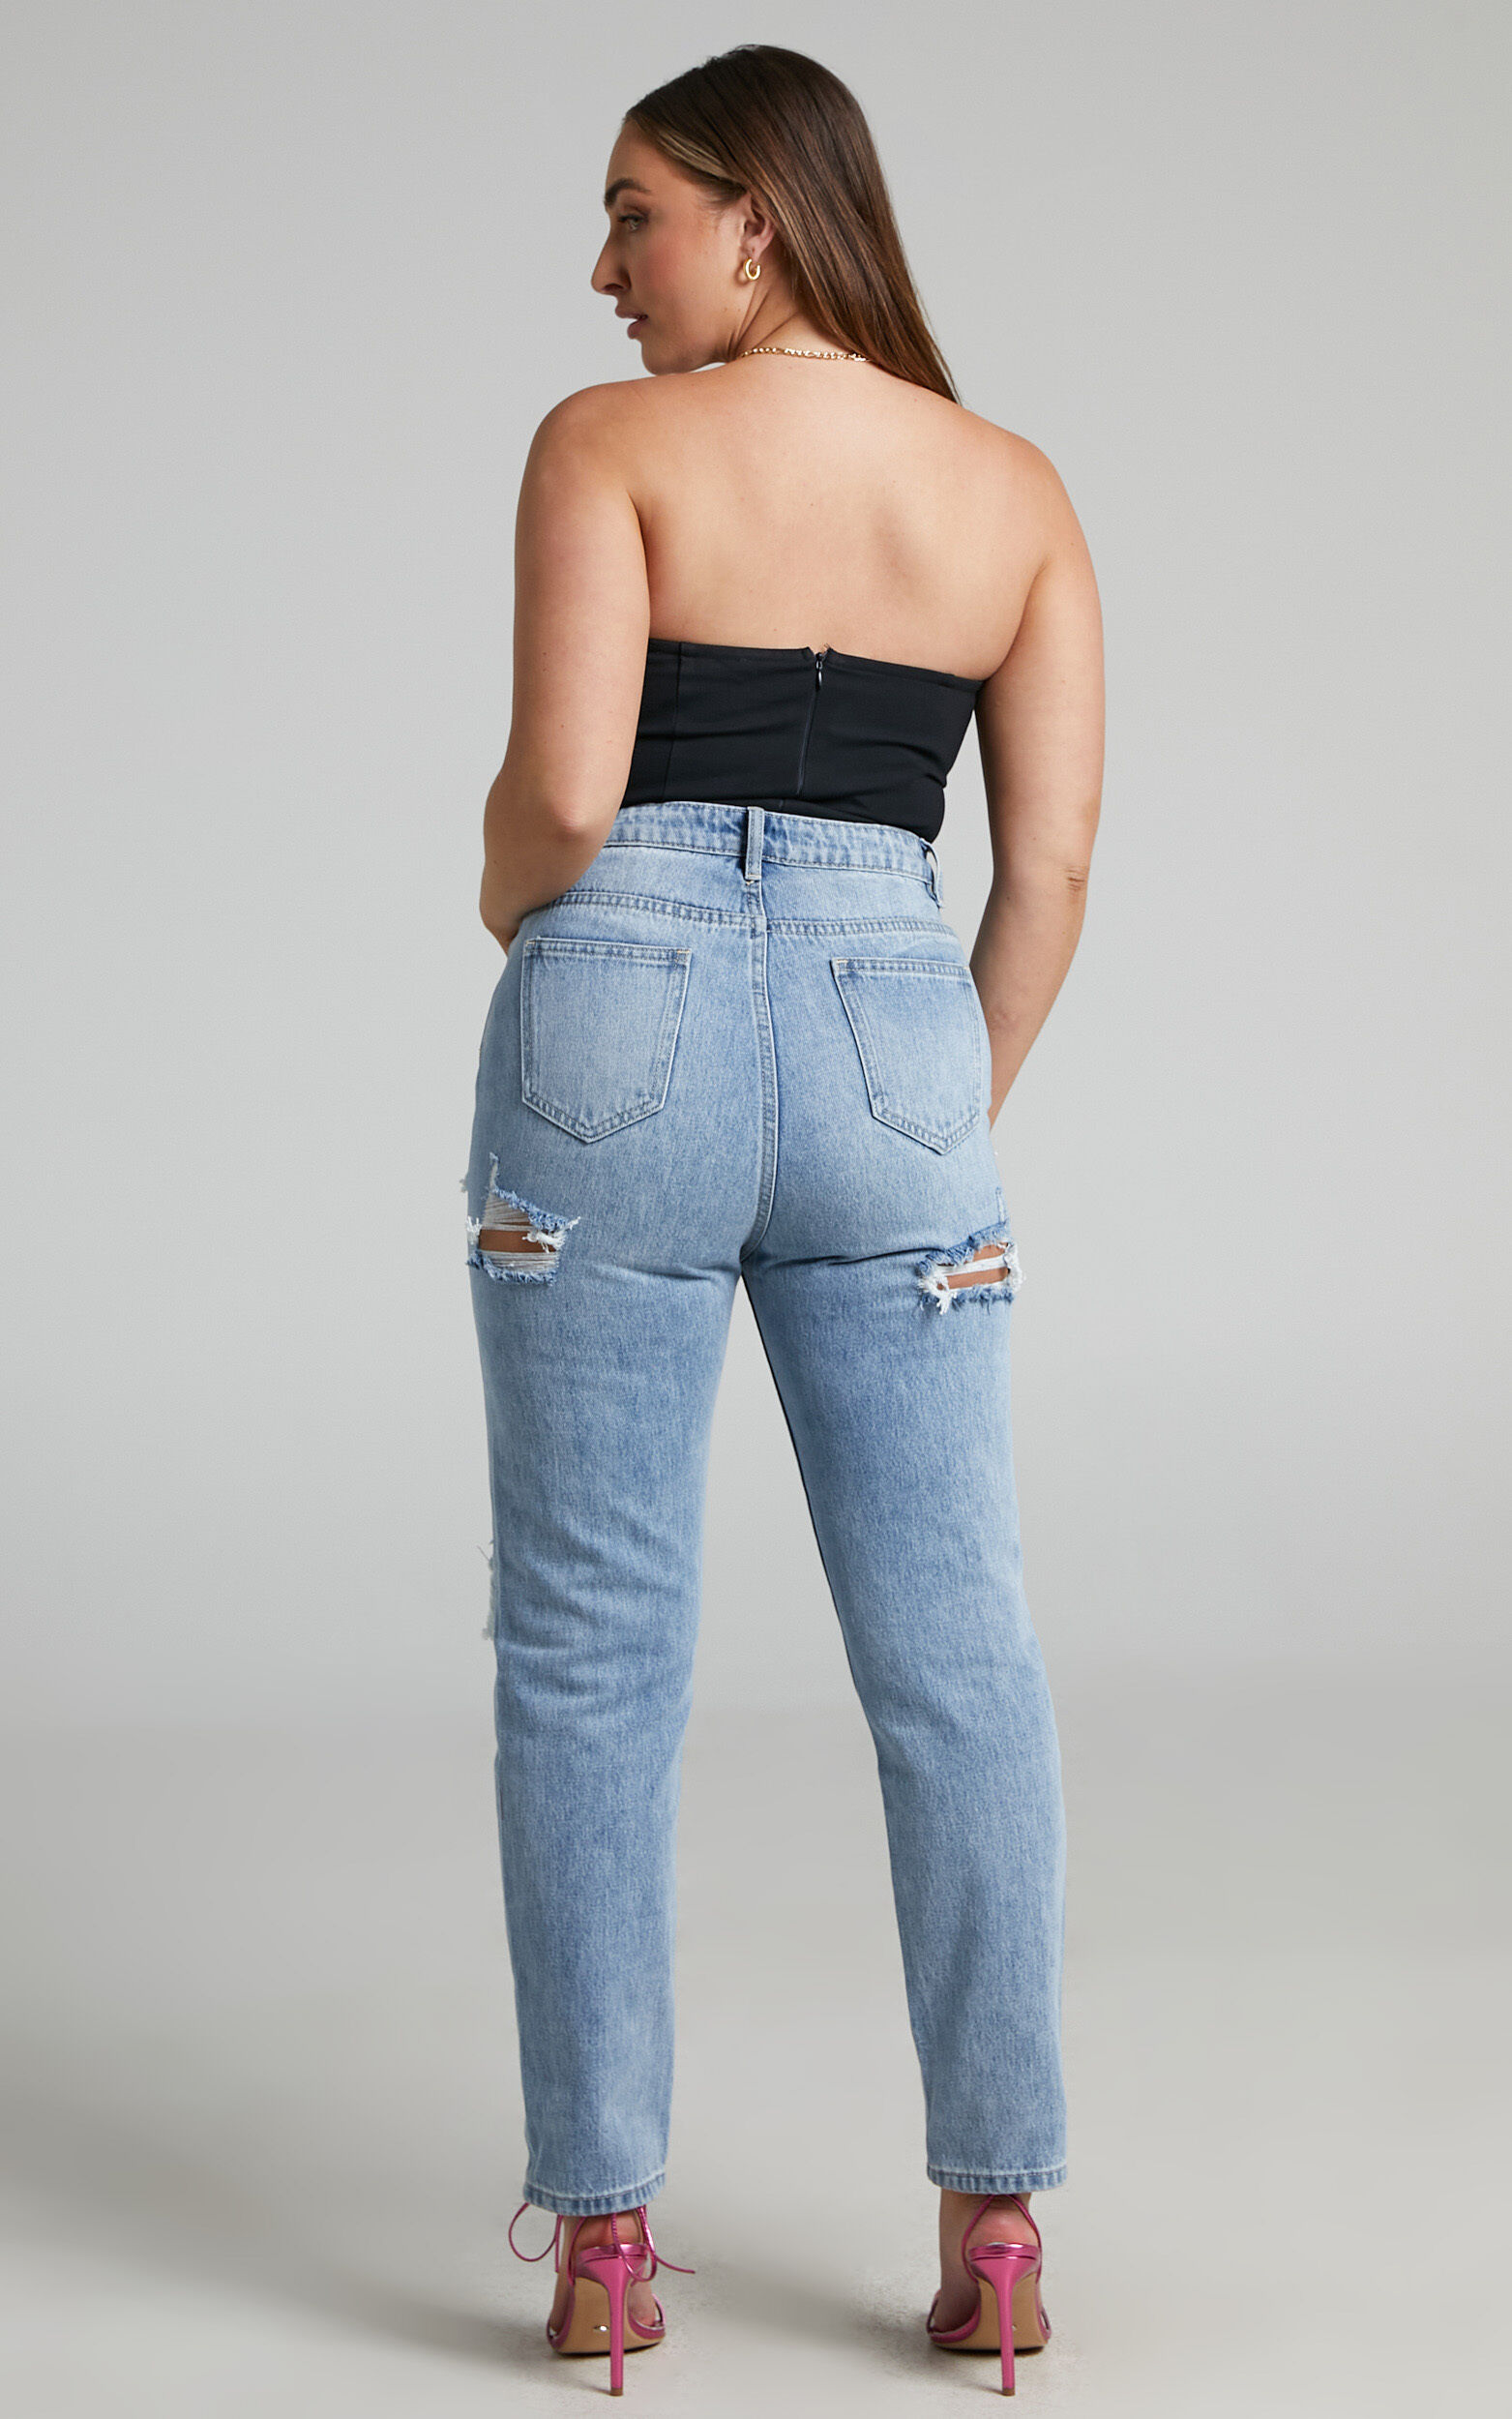 Billie Jeans - High Waisted Cotton Distressed Mom Denim Jeans in